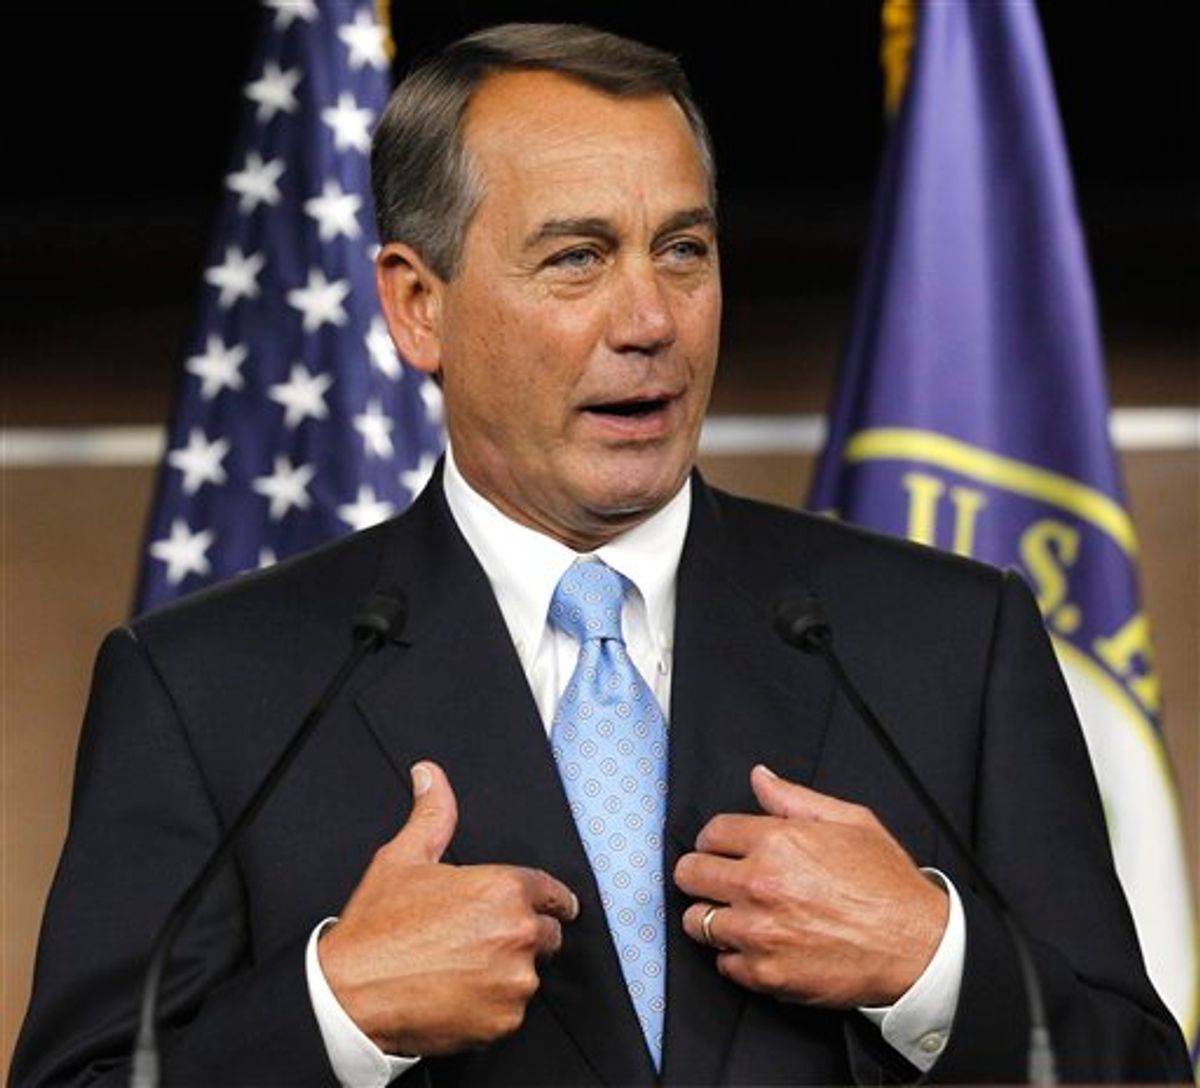 House Speaker John Boehner of Ohio gestures during a news conference on Capitol Hill in Washington, Wednesday, March 2, 2011. (AP Photo/Alex Brandon) (AP)